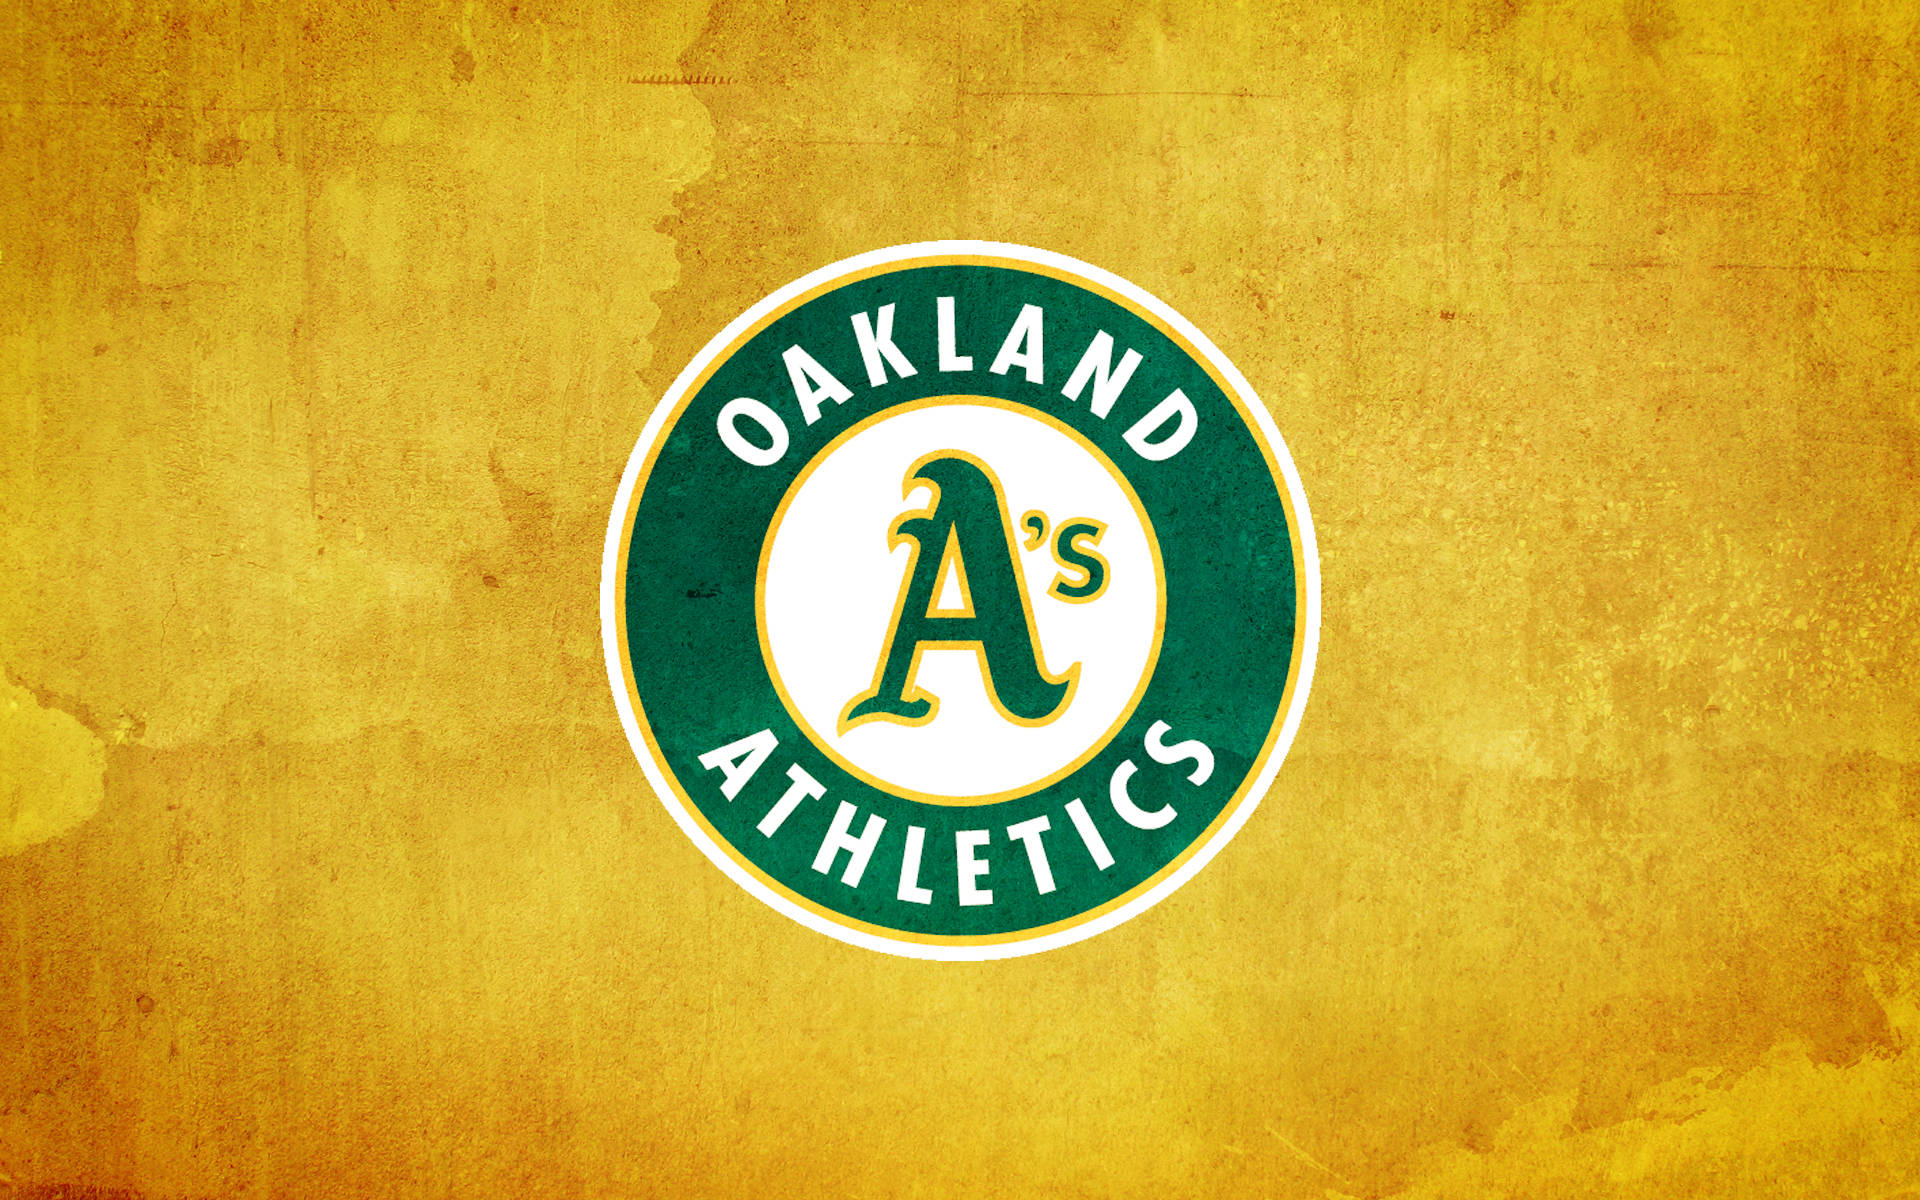 Top 999+ Oakland Athletics Wallpapers Full HD, 4K✅Free to Use